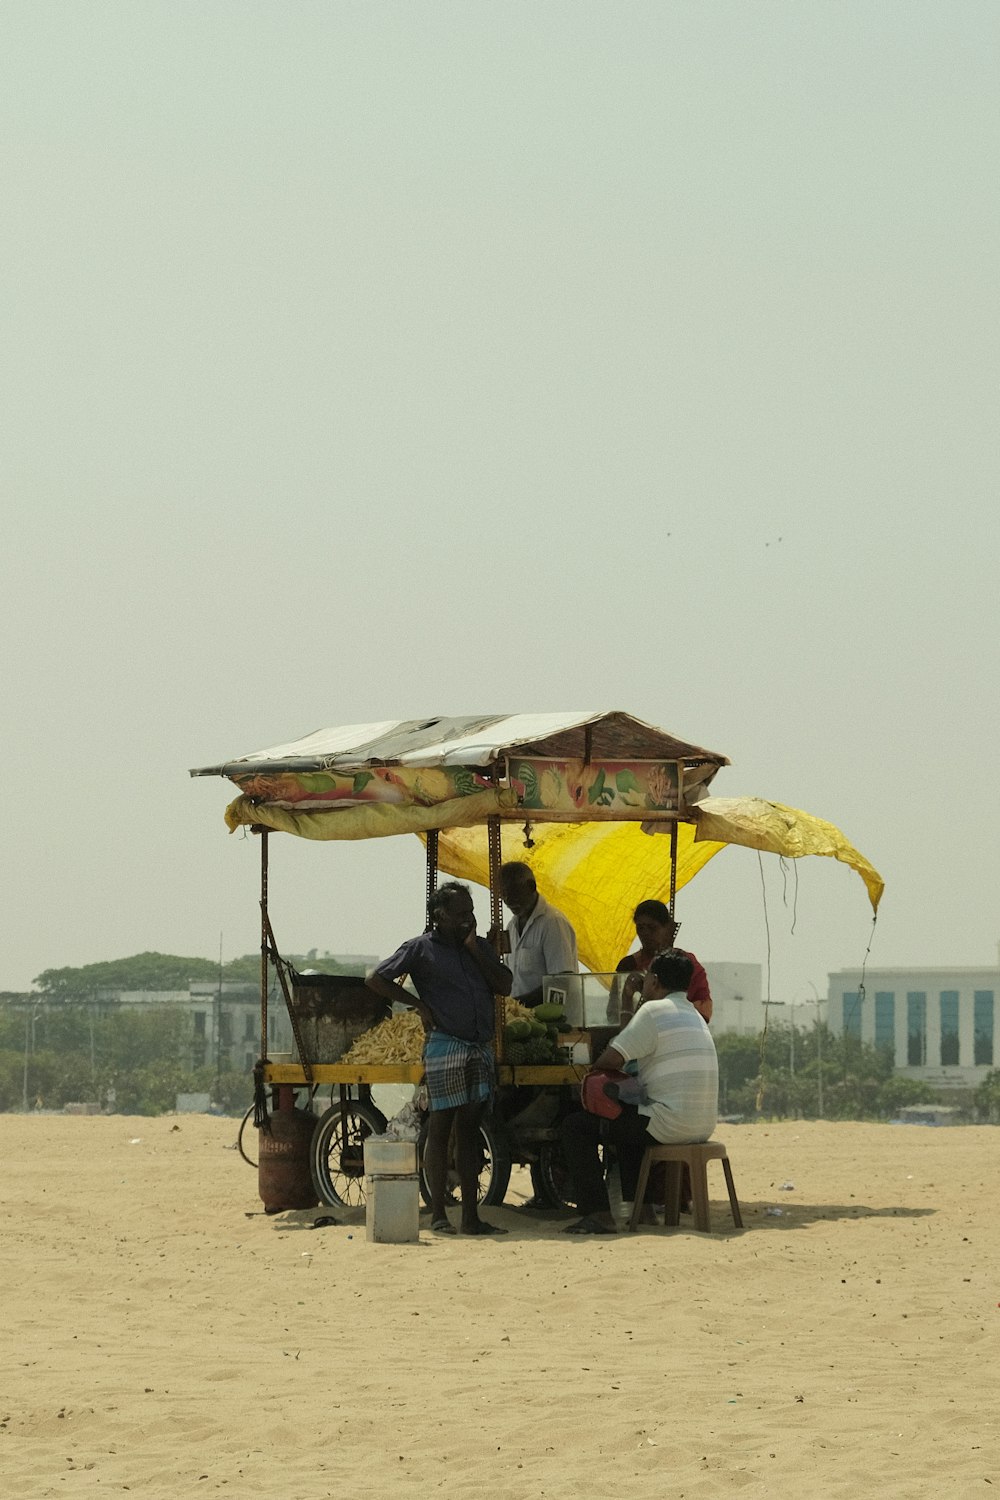 a group of people sitting under a yellow umbrella